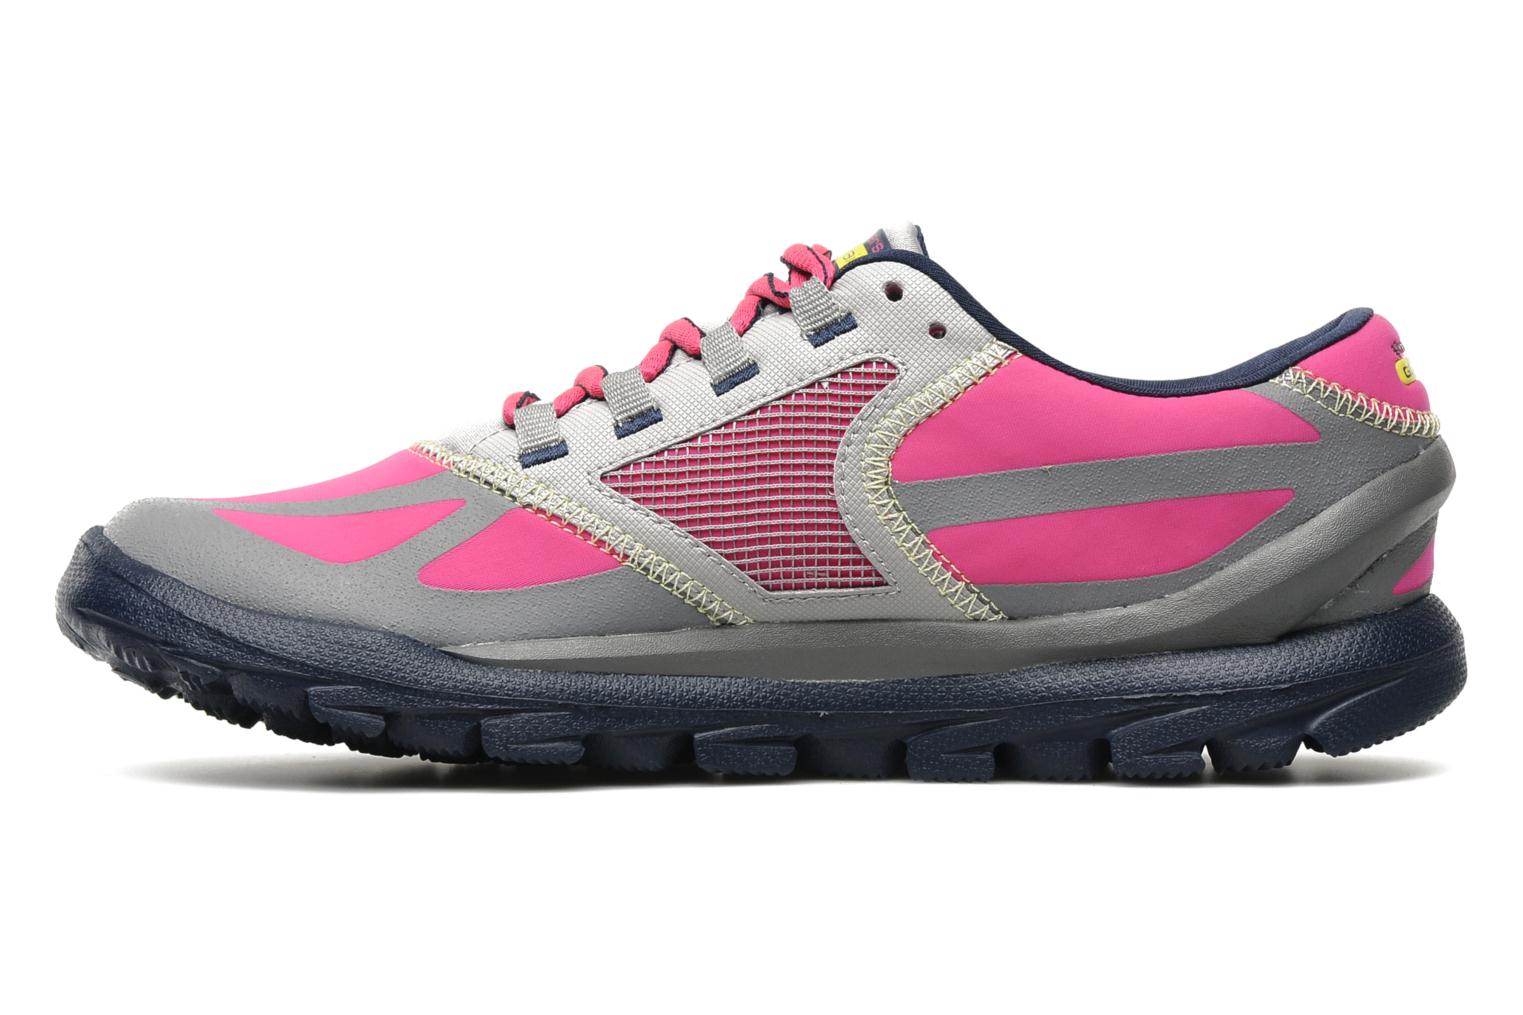 Skechers GO Trail 13508 Sport shoes in Pink at Sarenza.co.uk (111826)